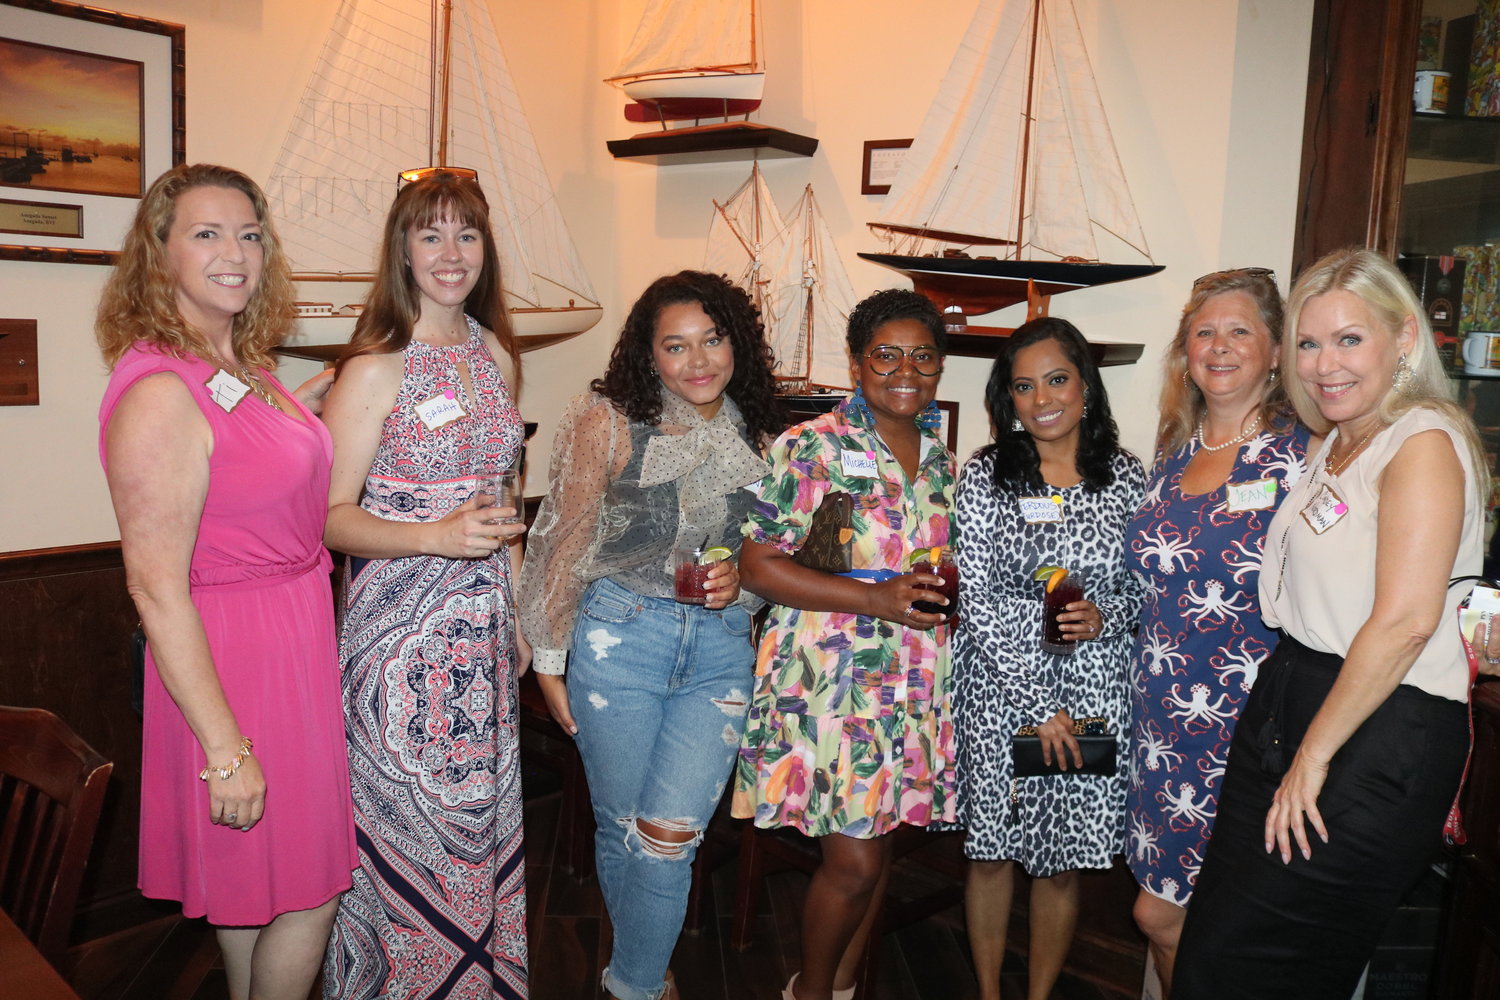 Women from throughout the local community attended the summer social event.